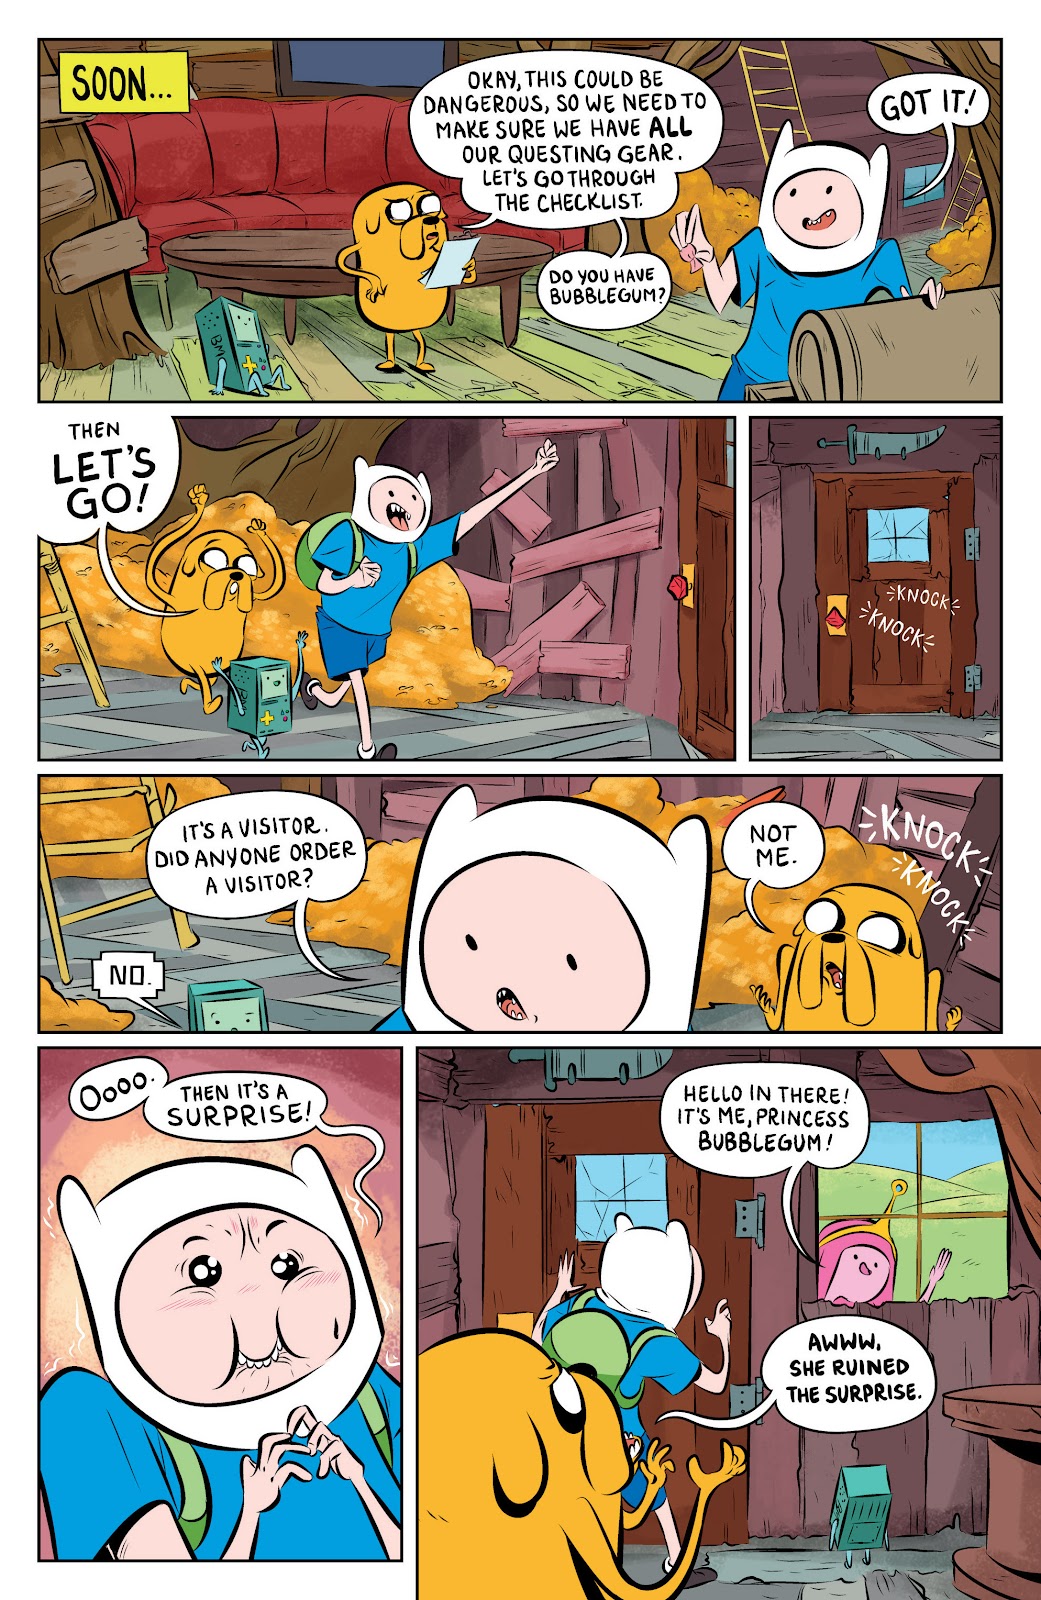 Adventure Time: The Flip Side issue 1 - Page 12